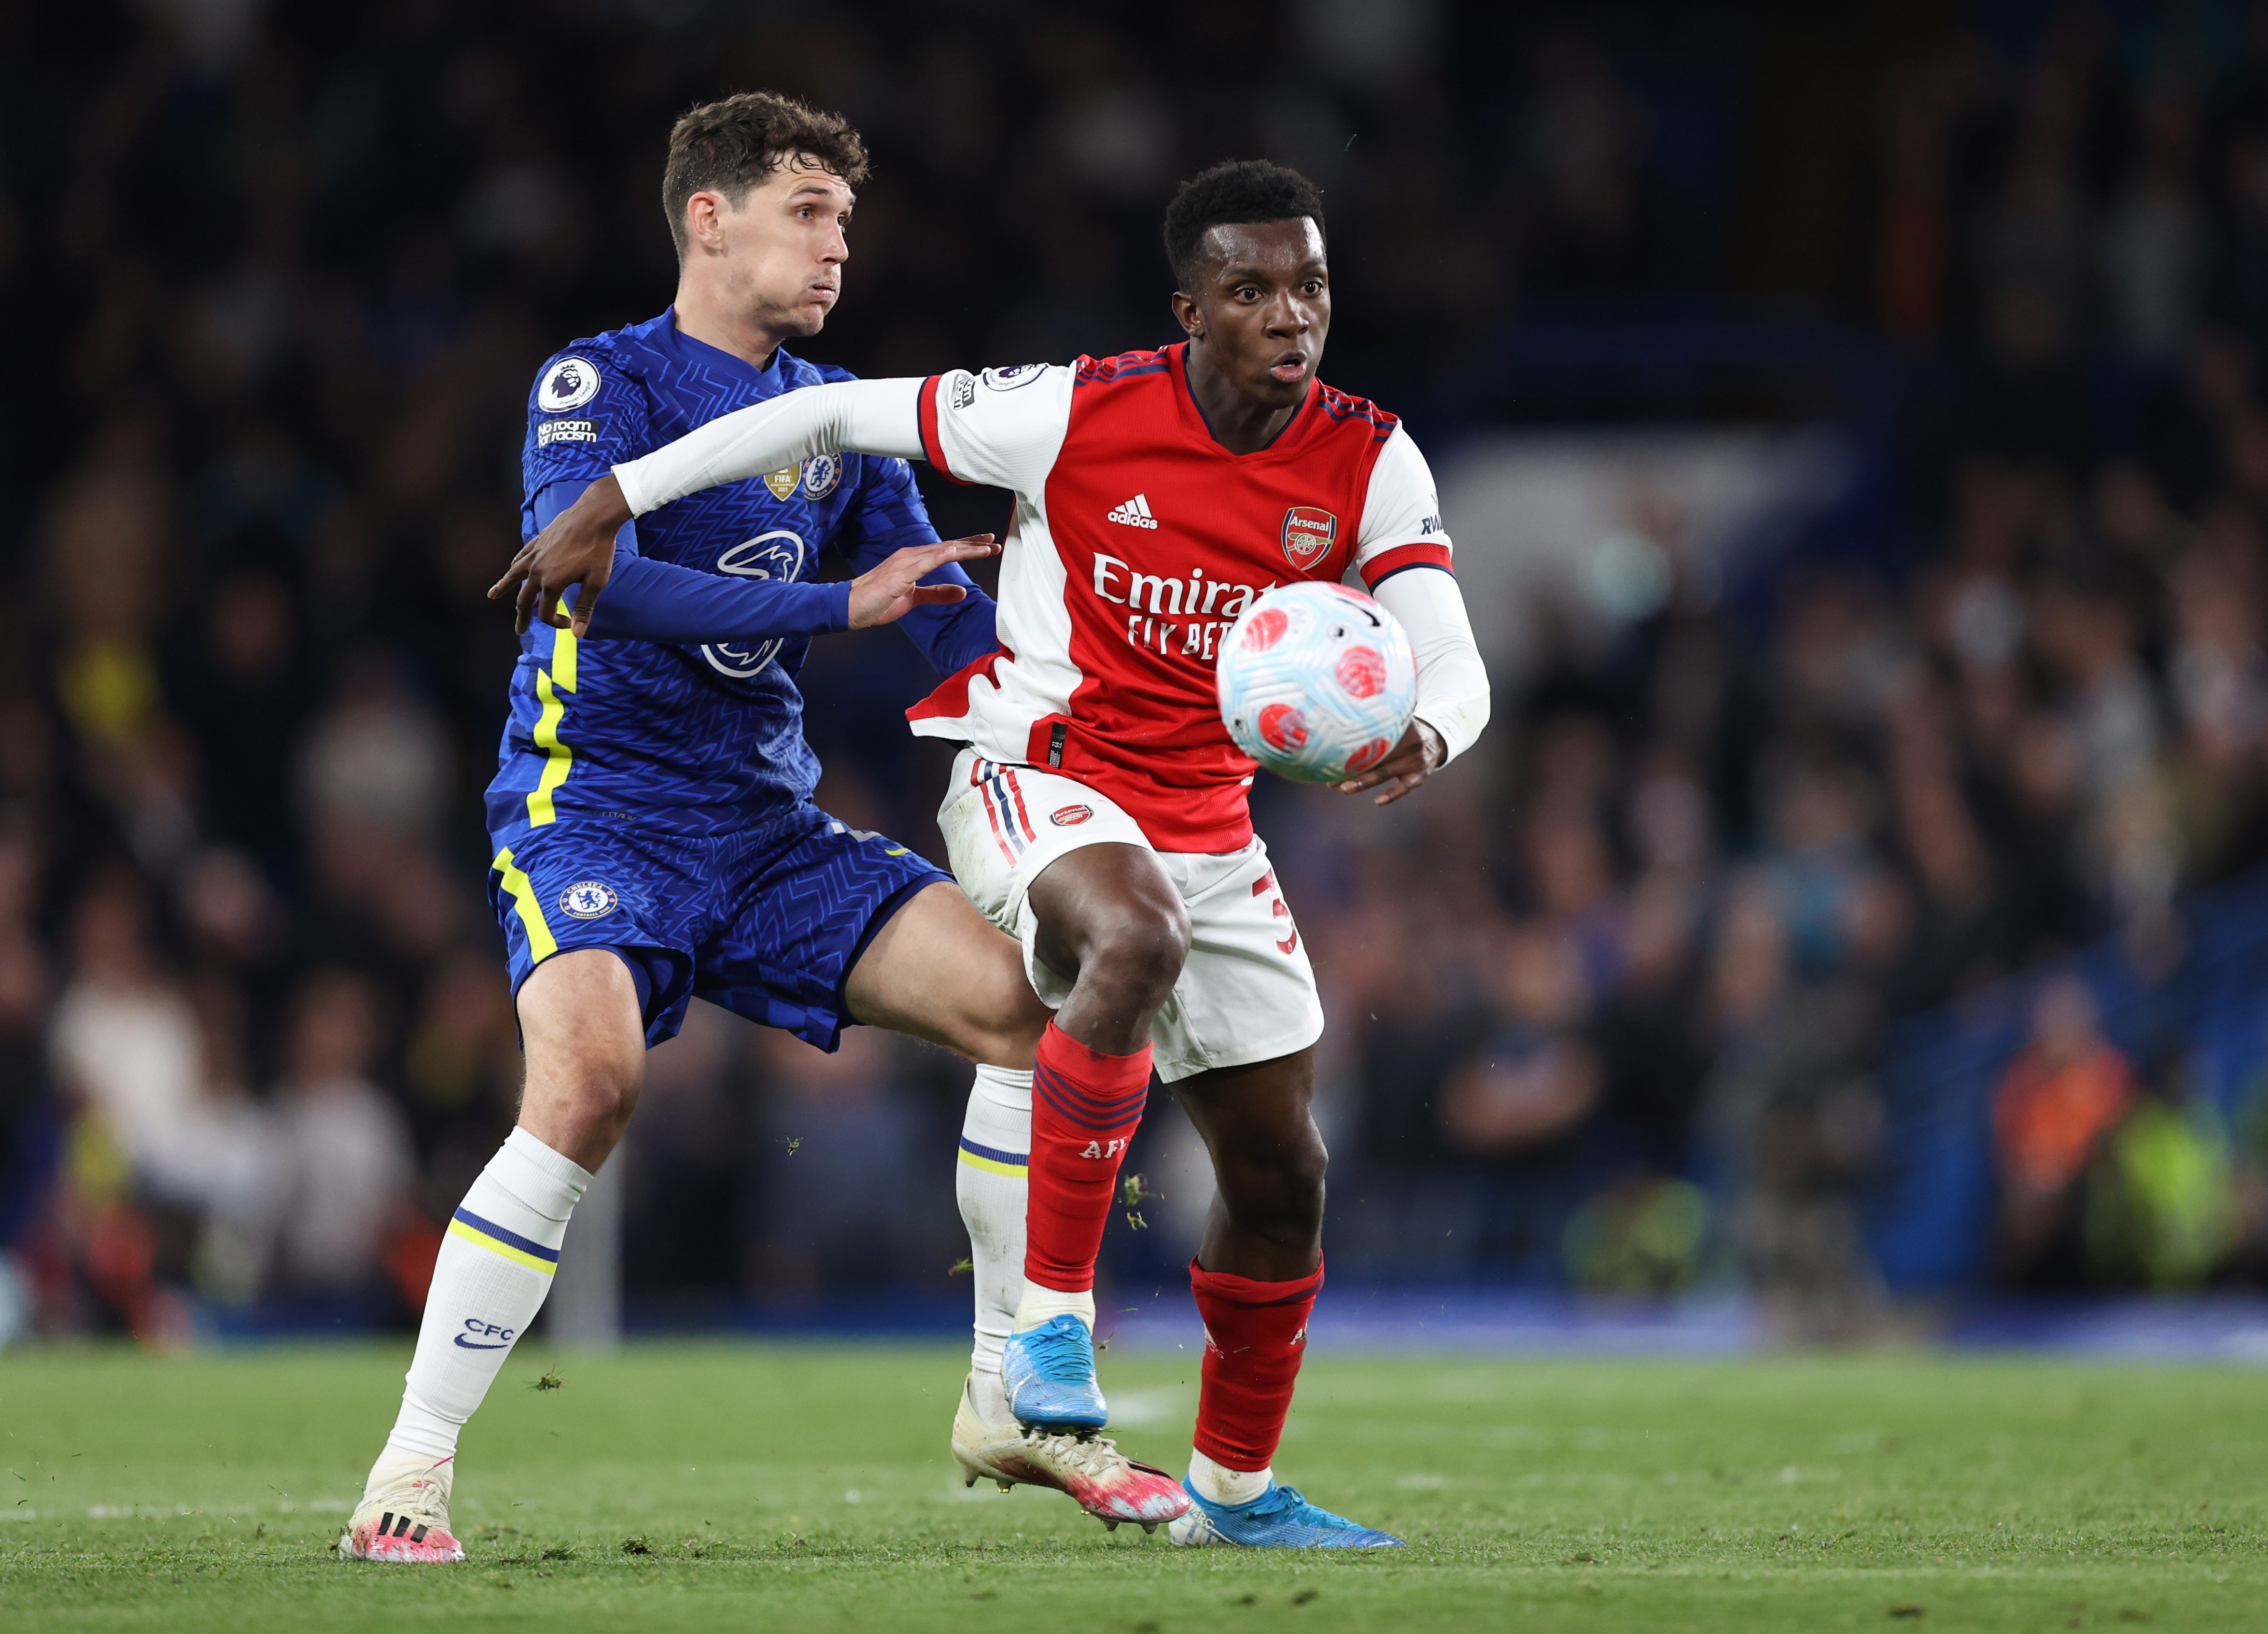 Arsenal hero Eddie Nketiah: We want Champions League qualification for supporters